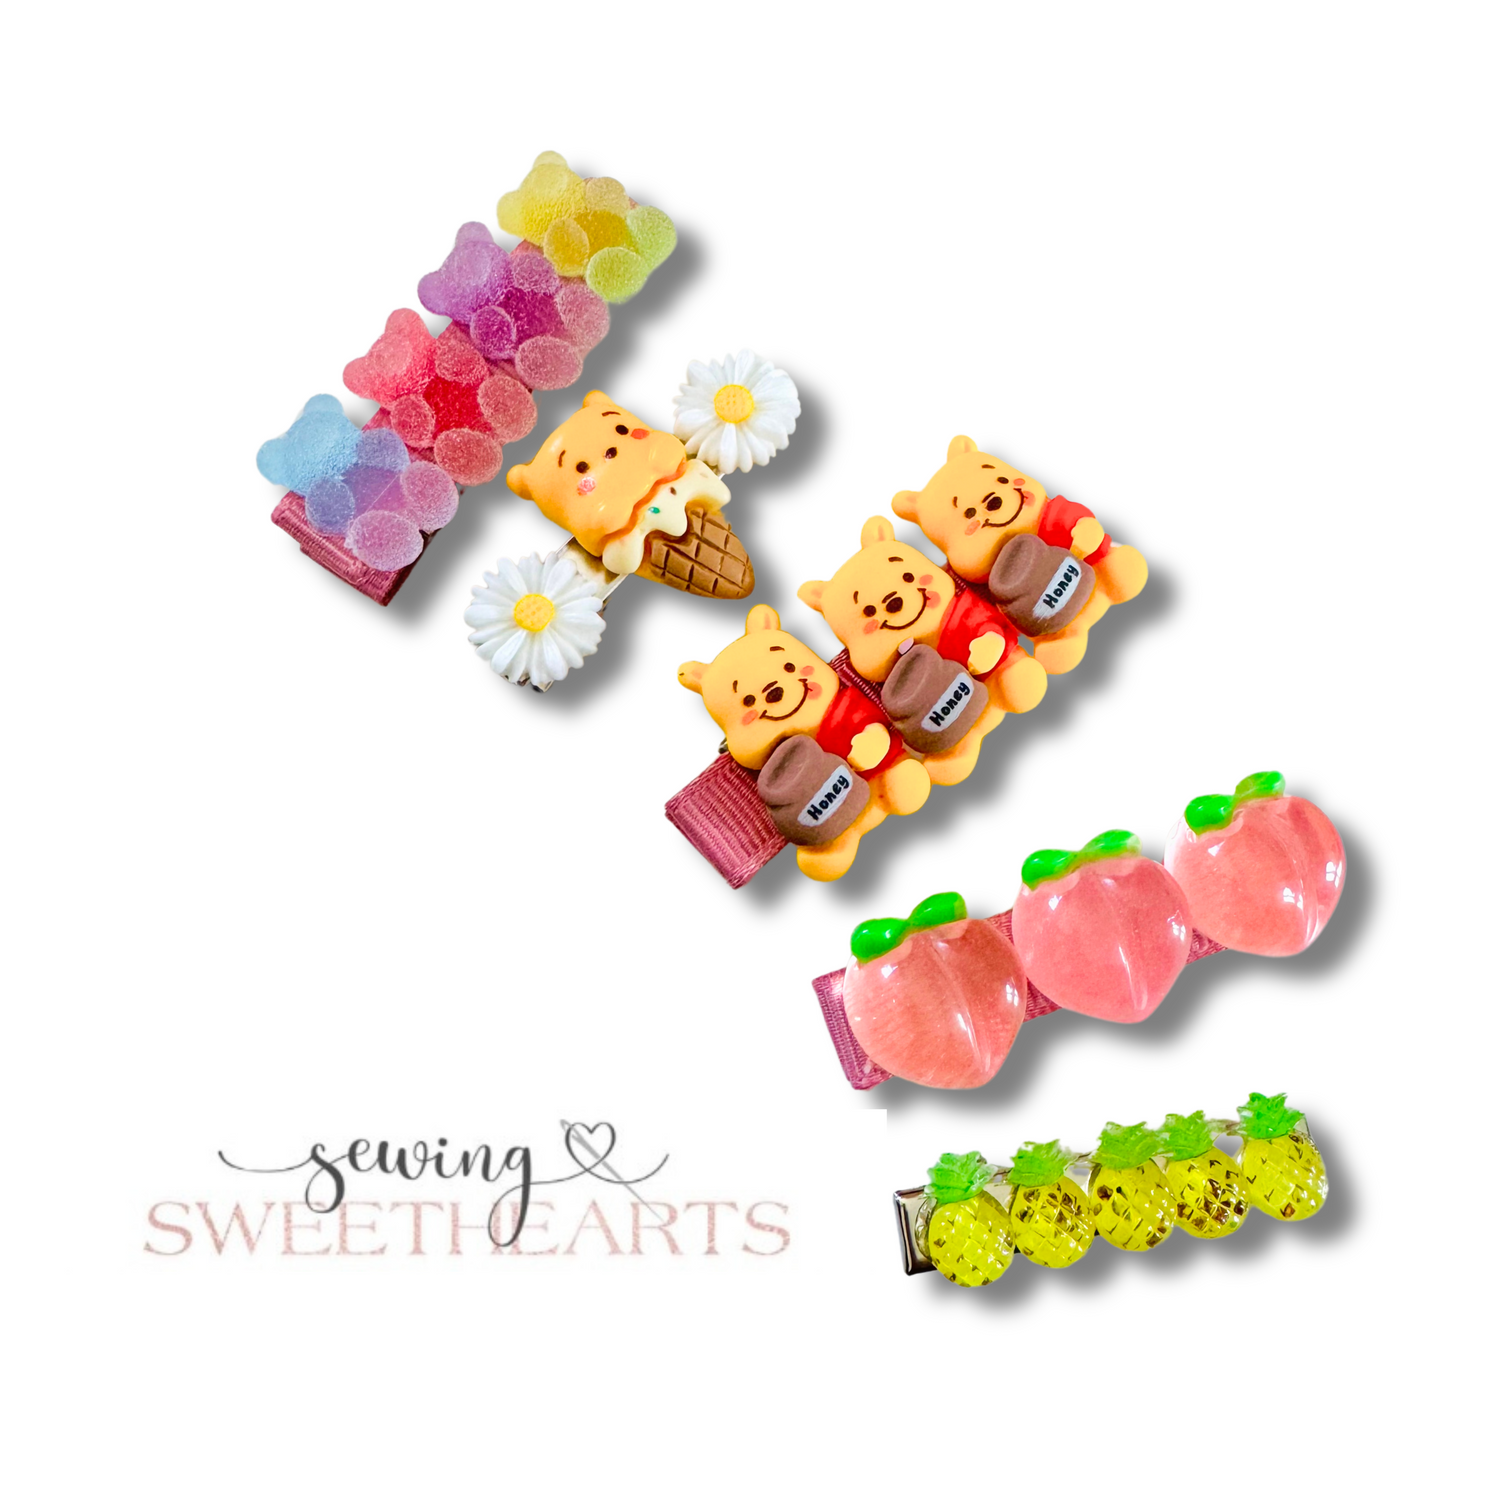 Cute Clips 2.0  Sewing Sweethearts   